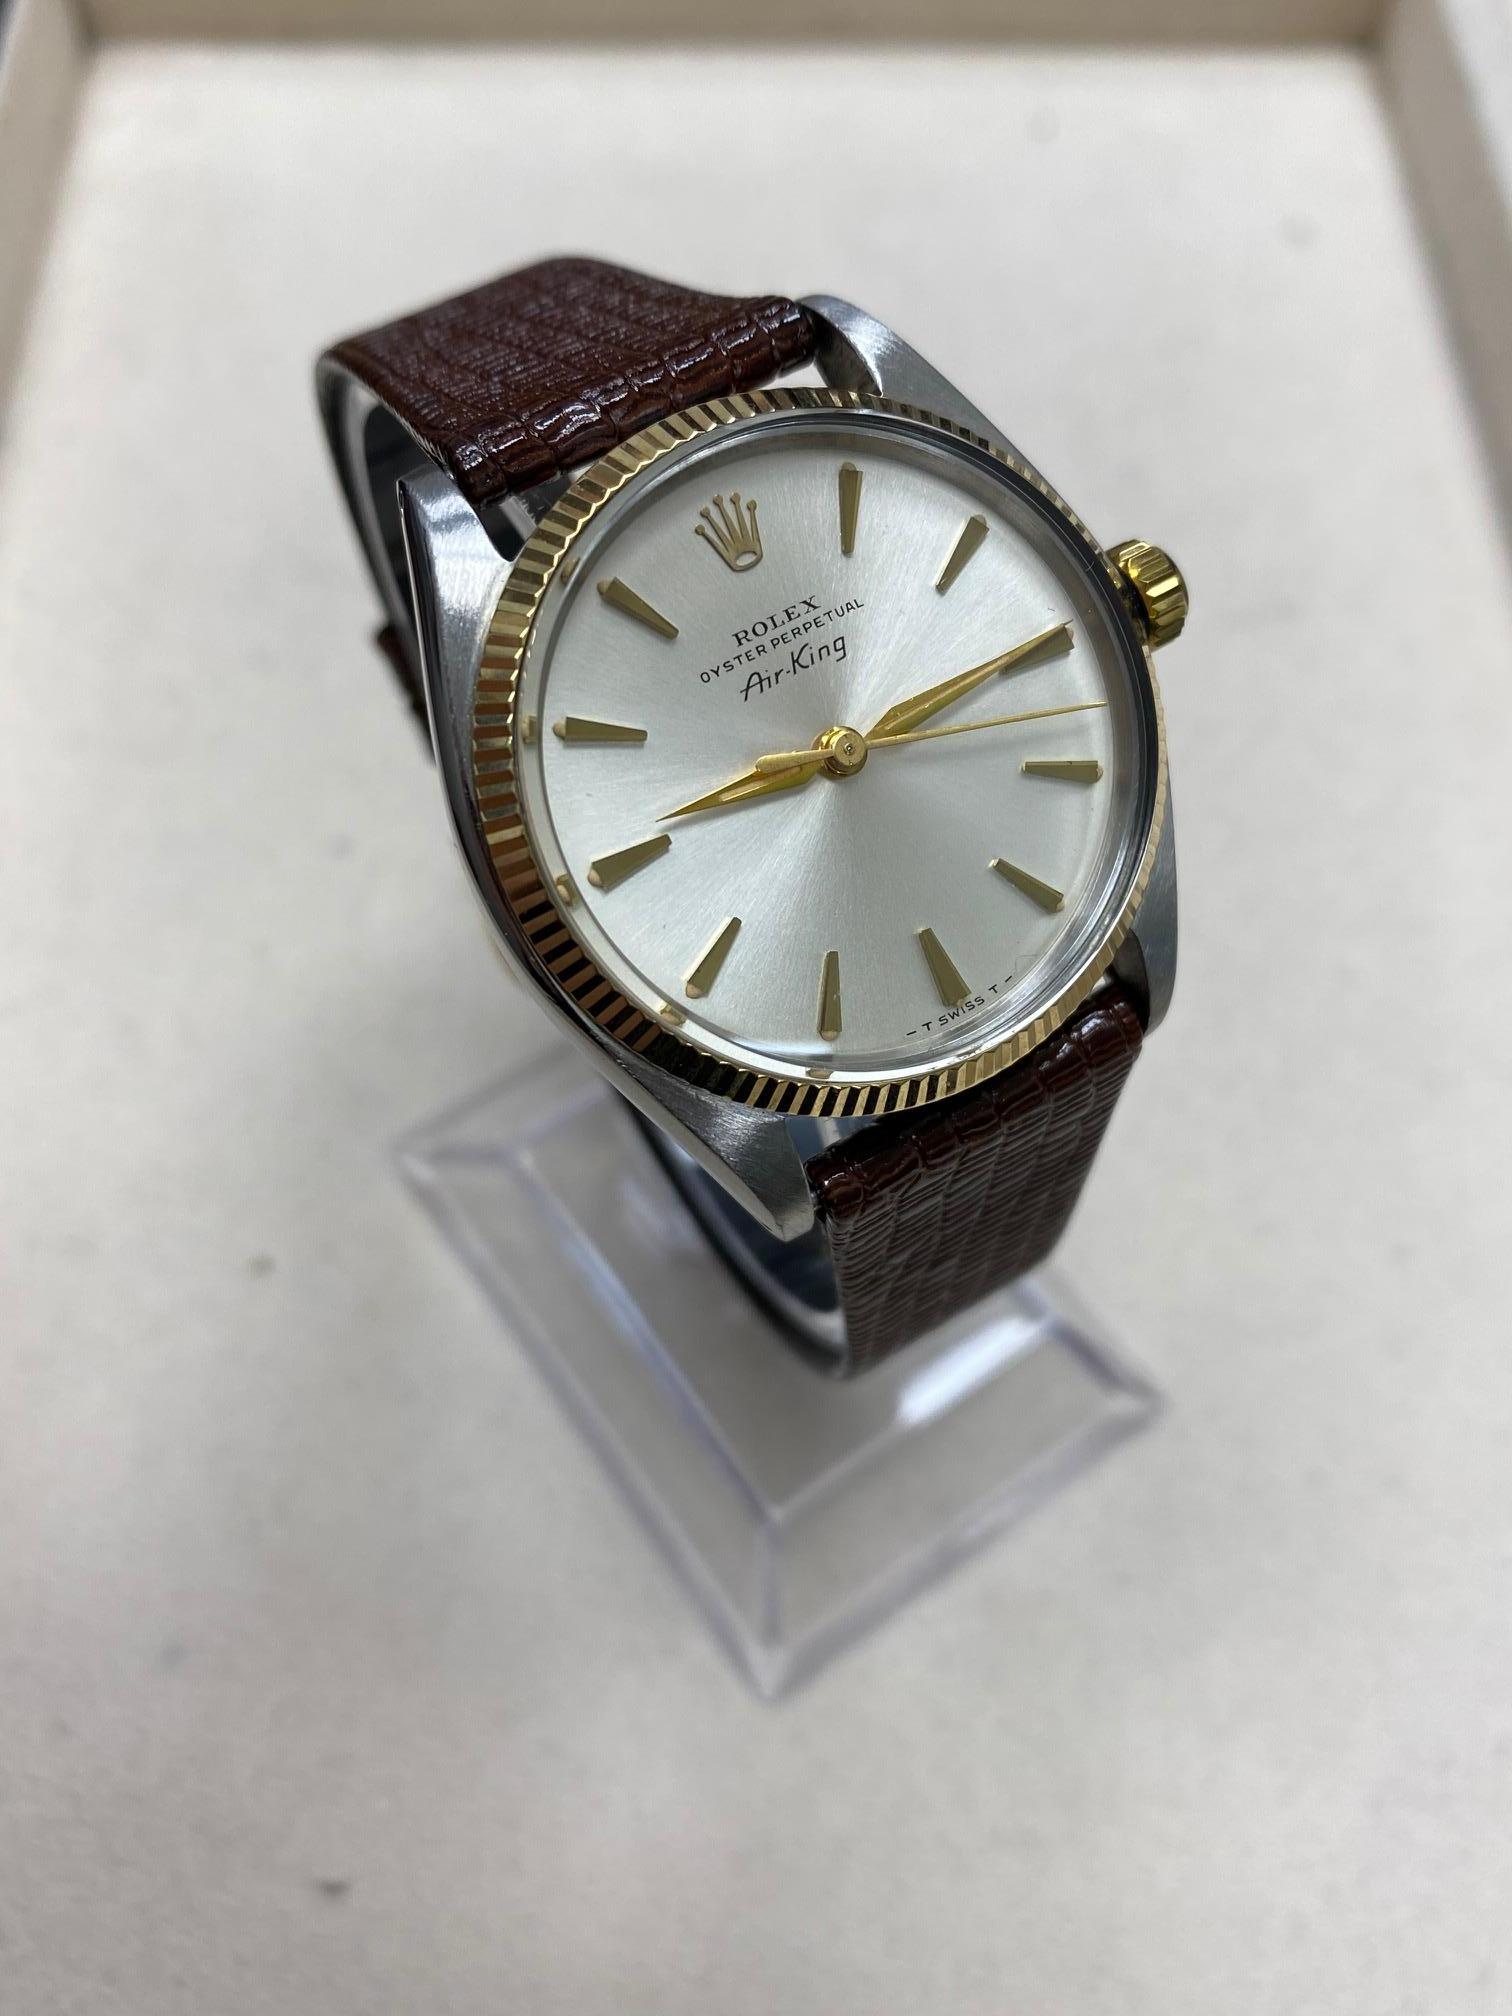 Style Number: 5501

 

Serial: 968***

 

Model: Air King

 

Case Material: Stainless Steel 

 

Band: Custom Leather Band 

 

Bezel:  14K Yellow Gold

 

Dial: Silver

 

Face: Acrylic 

 

Case Size: 34mm

 

Includes: 

-Elegant Watch